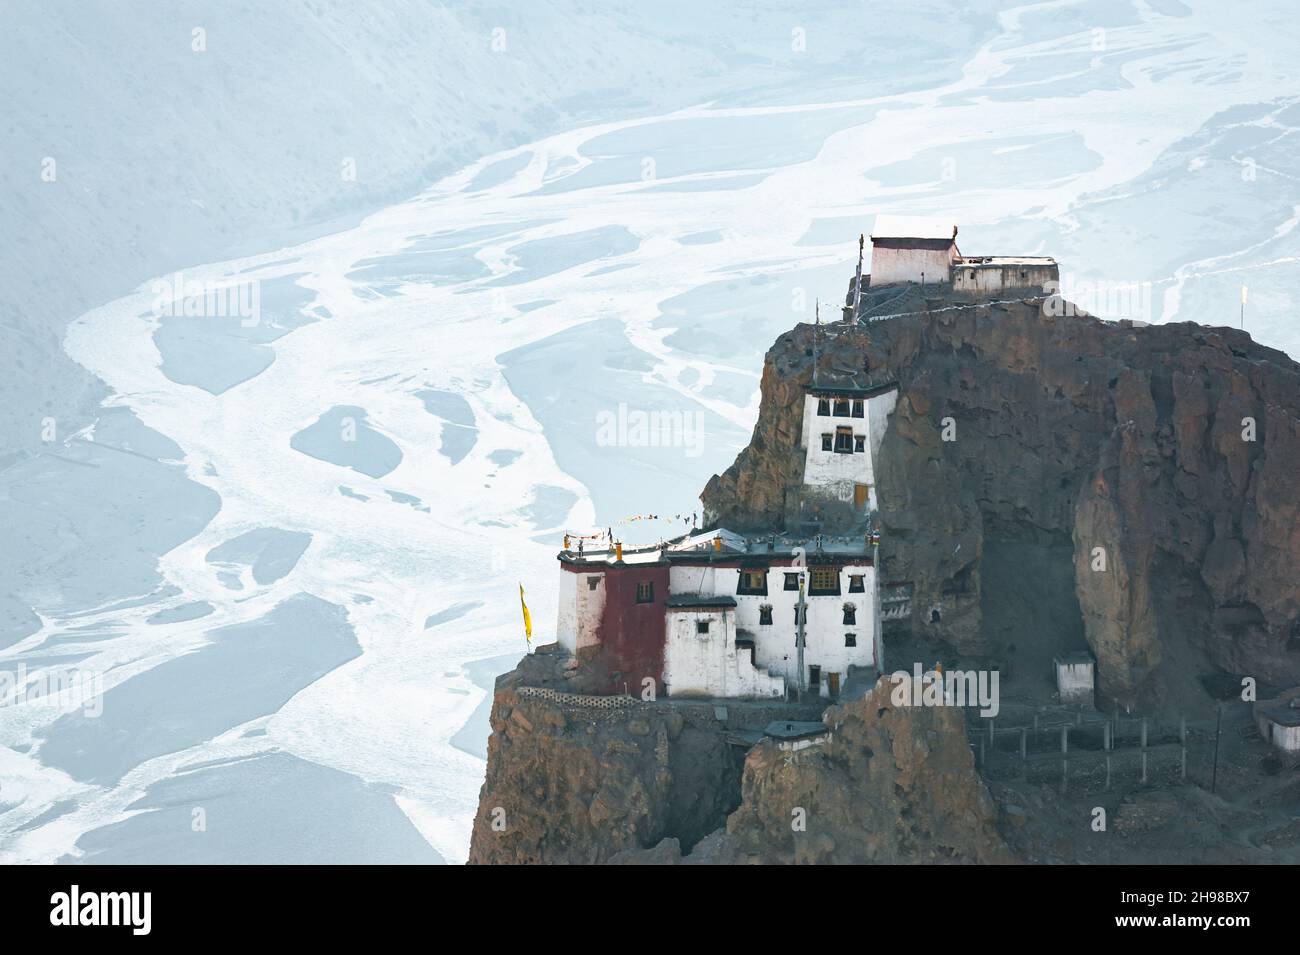 A Buddhist temple Dhankar Gompa on a high cliff overlooking the confluence of Pin Rivers and Spiti Valley at Dhankar village, Himachal Pradesh, India. Landscape photography Stock Photo